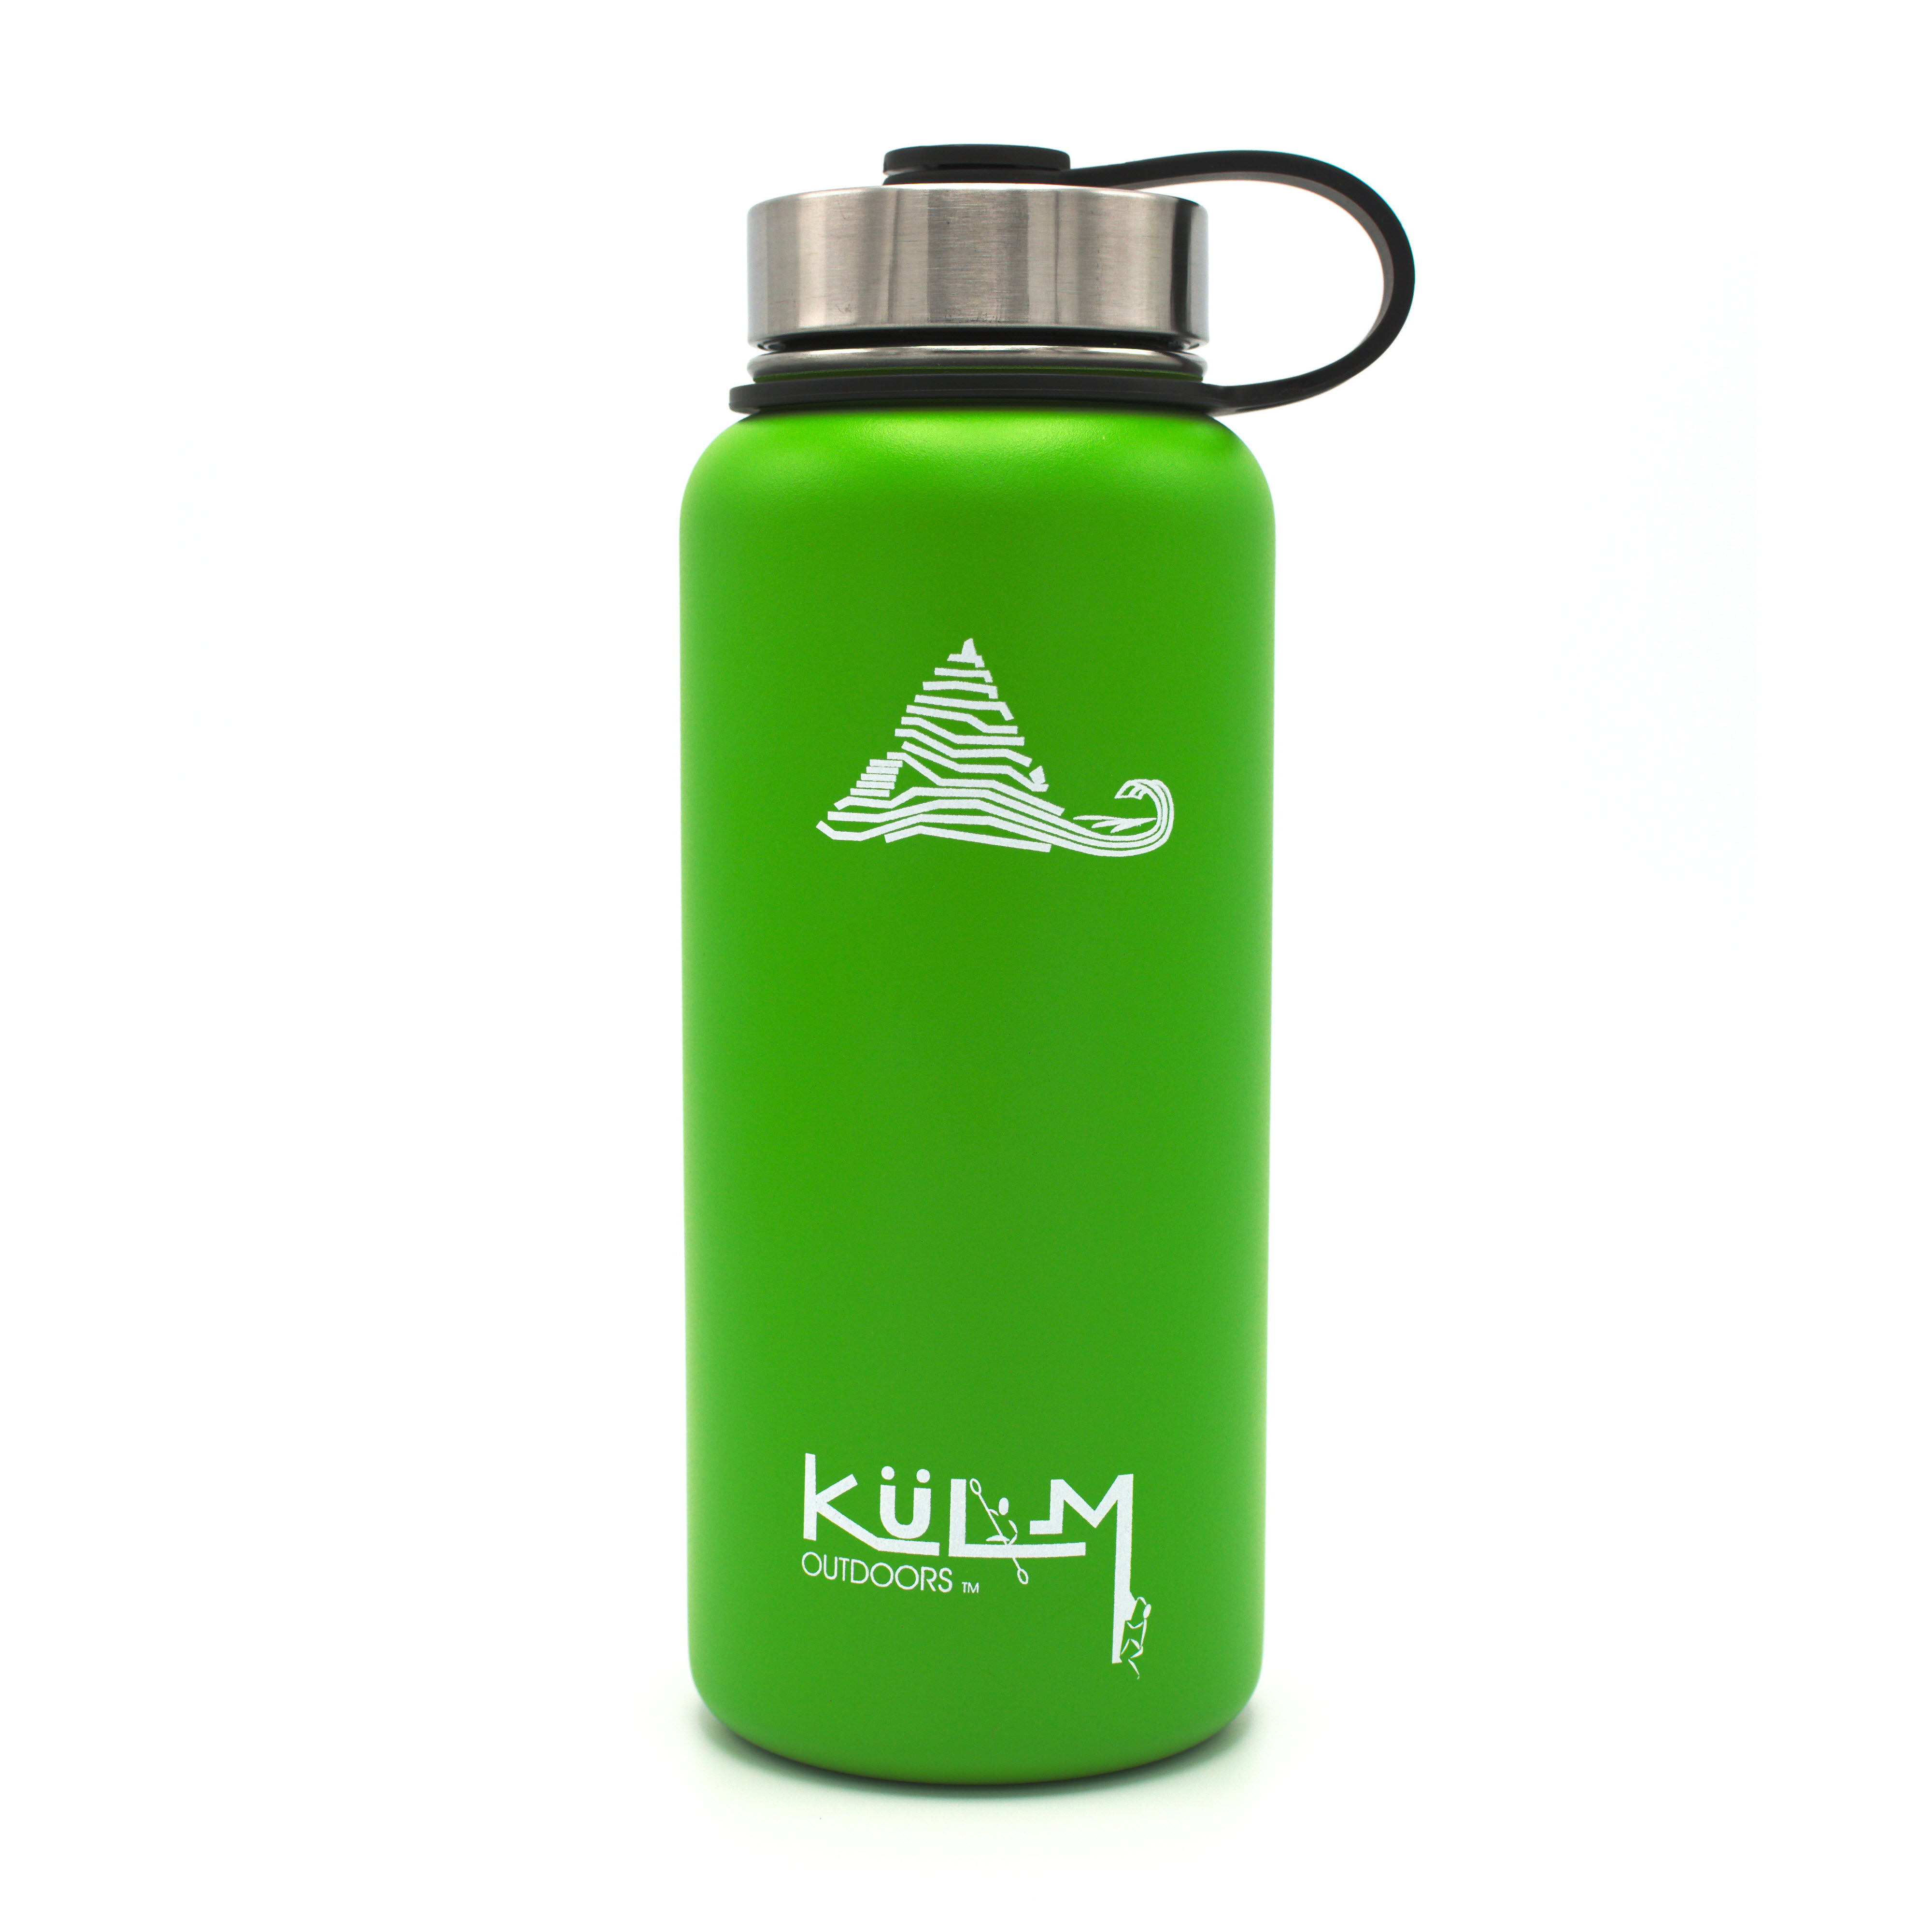  32oz Insulated Stainless Steel Water Bottle with